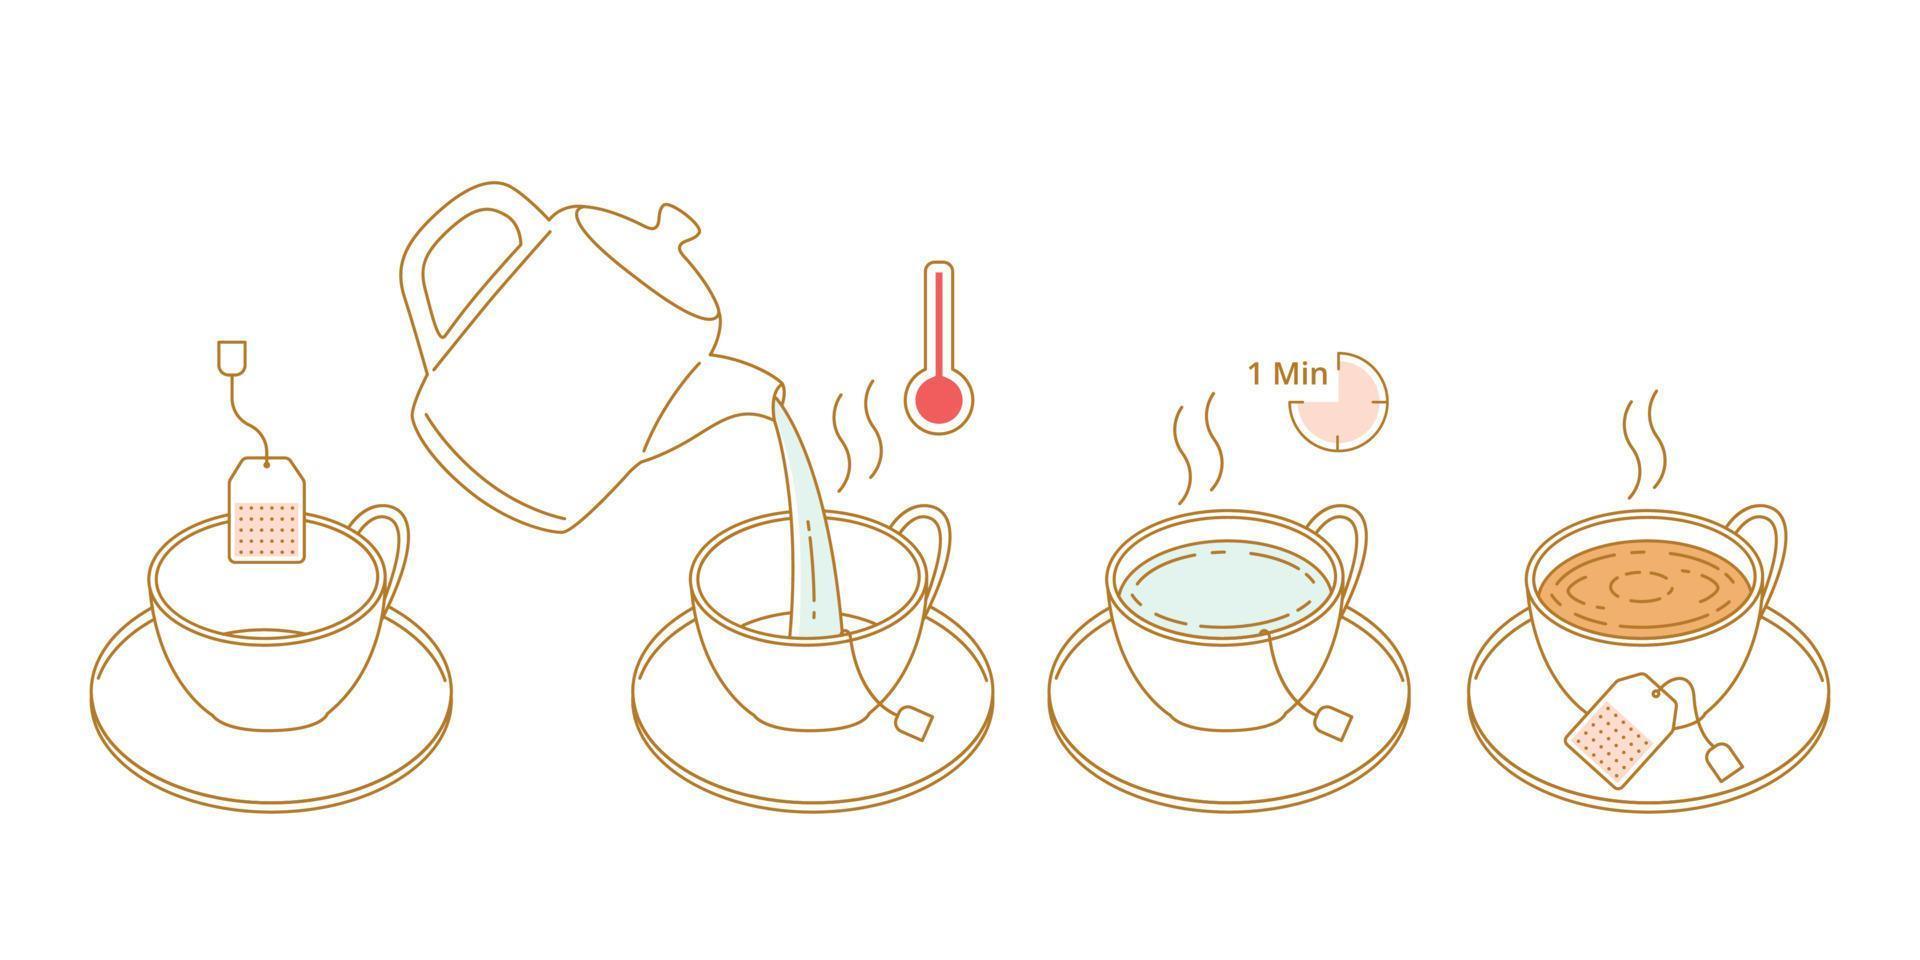 https://static.vecteezy.com/system/resources/previews/005/545/838/non_2x/instruction-how-to-brewing-tea-bag-outline-doodle-hand-drawn-illustration-vector.jpg